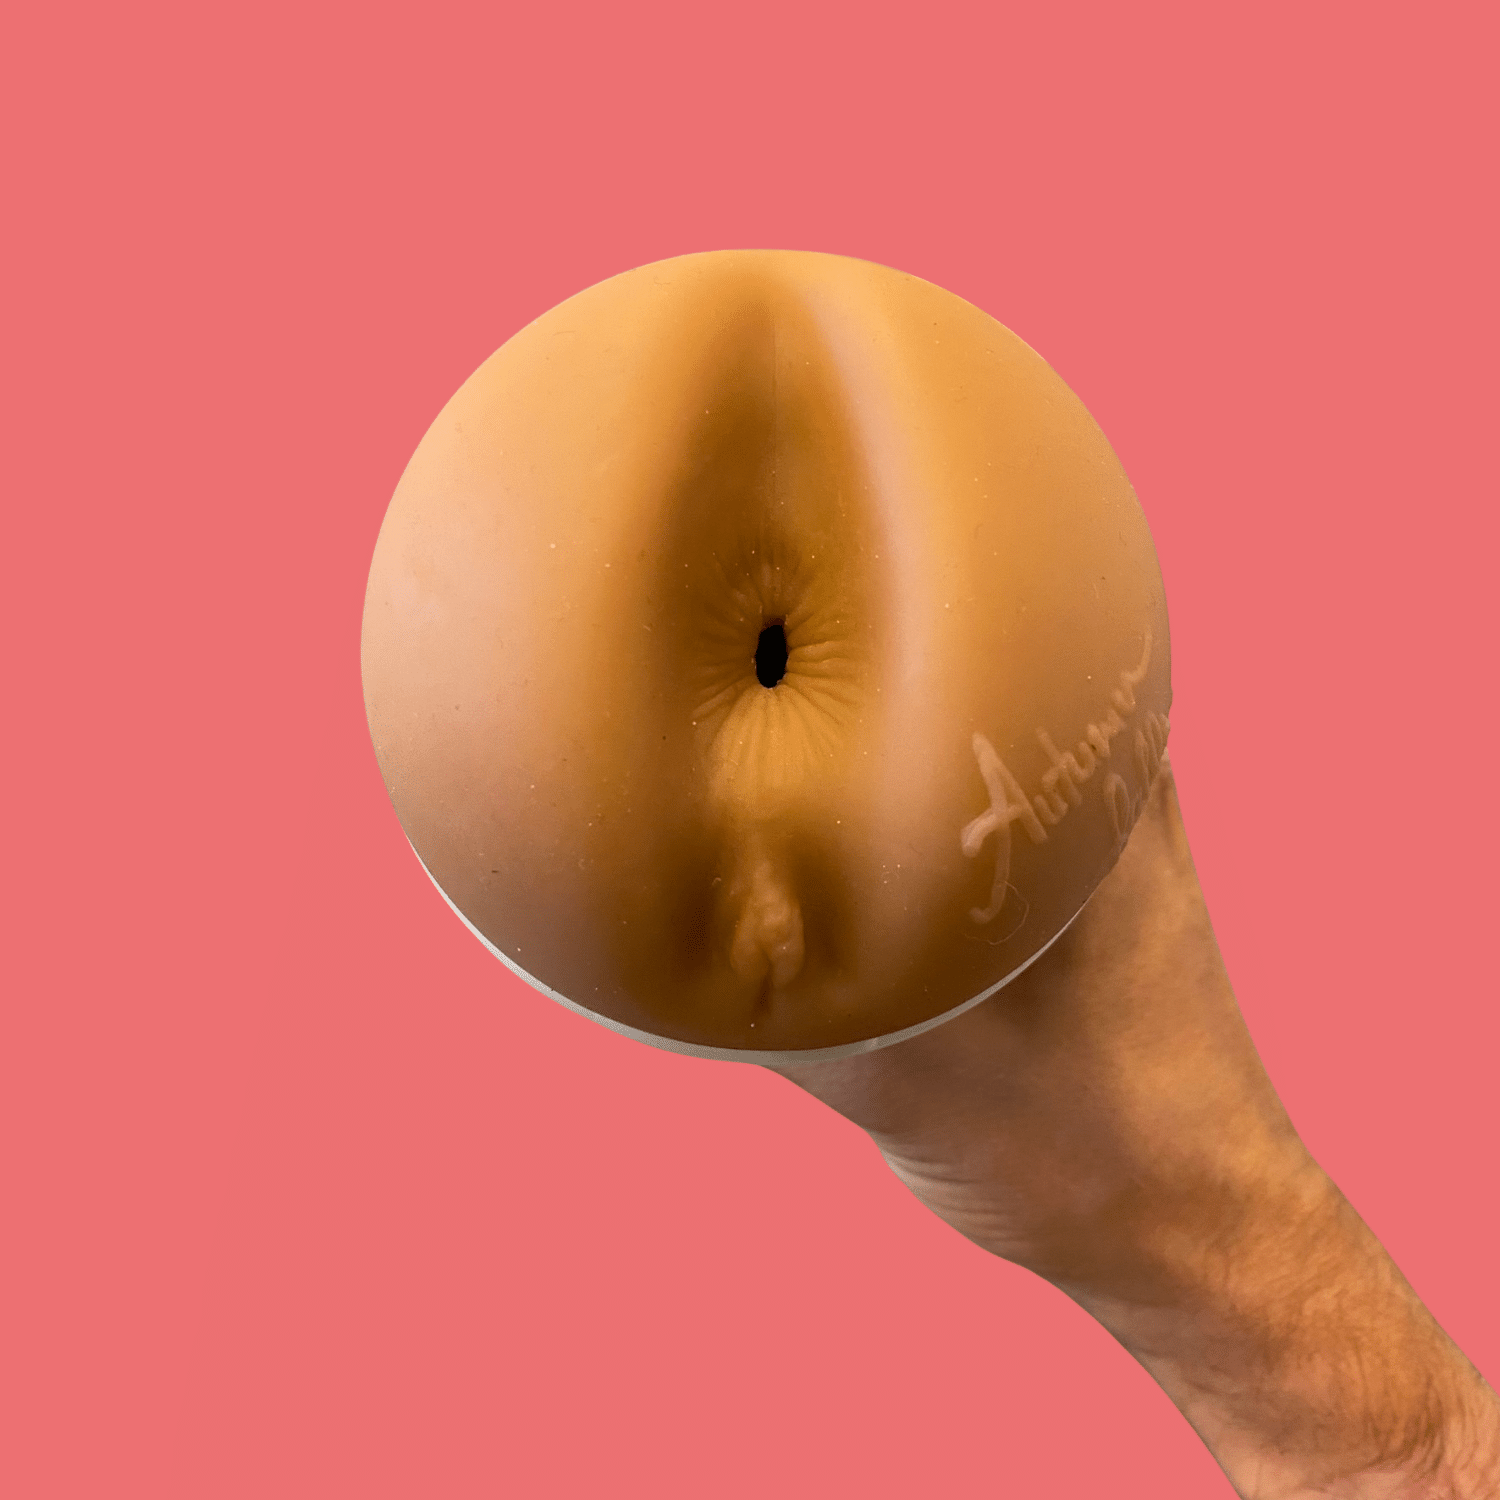 Autumn Falls Anal Fleshlight Review (of the Peaches Sleeve)